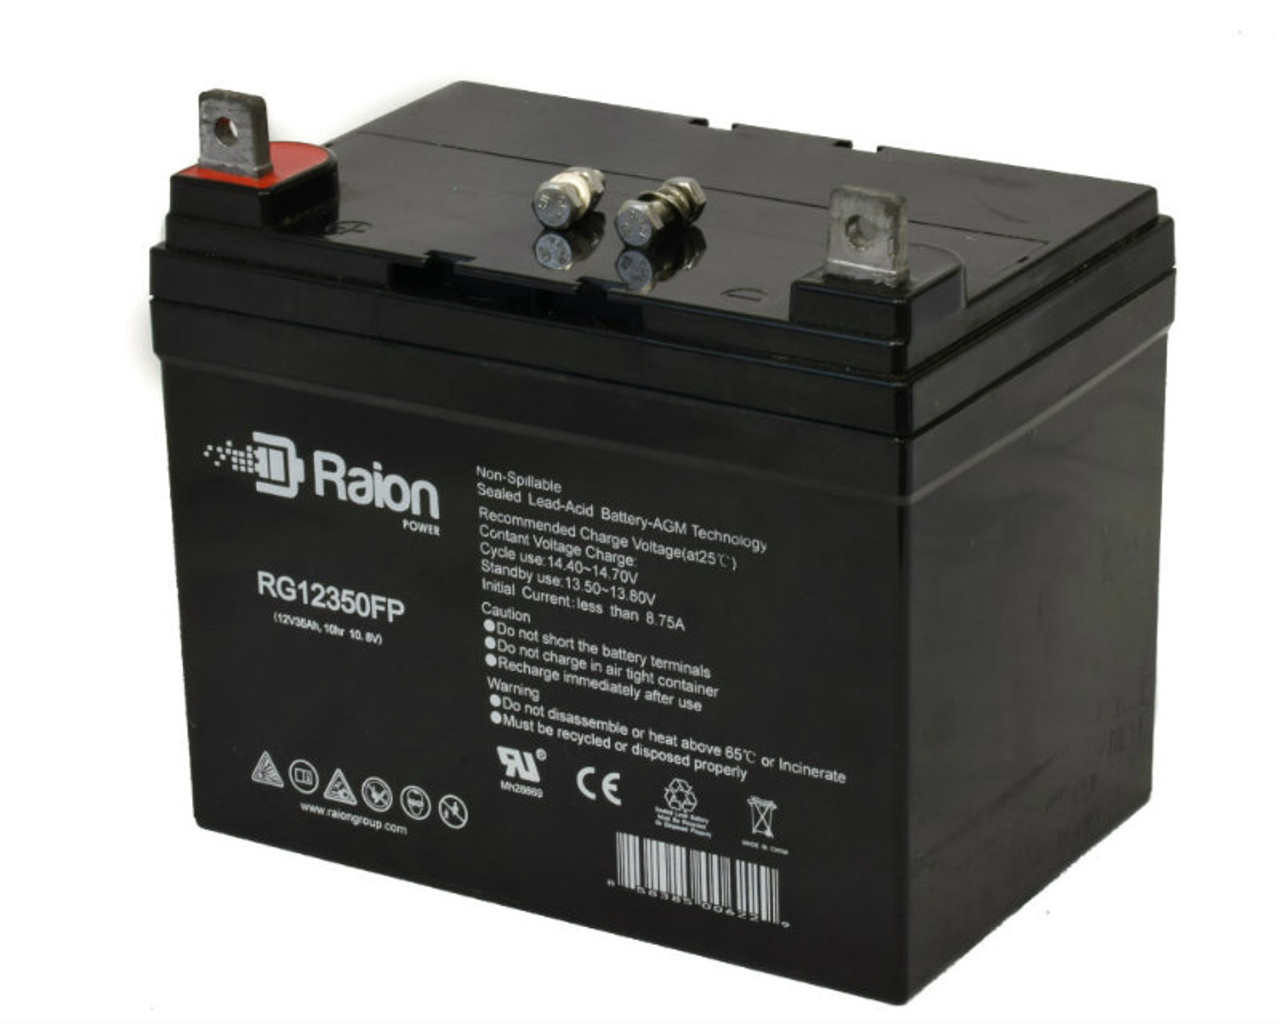 Raion Power Replacement 12V 35Ah Battery for EaglePicher CF-12V33U1 - 1 Pack